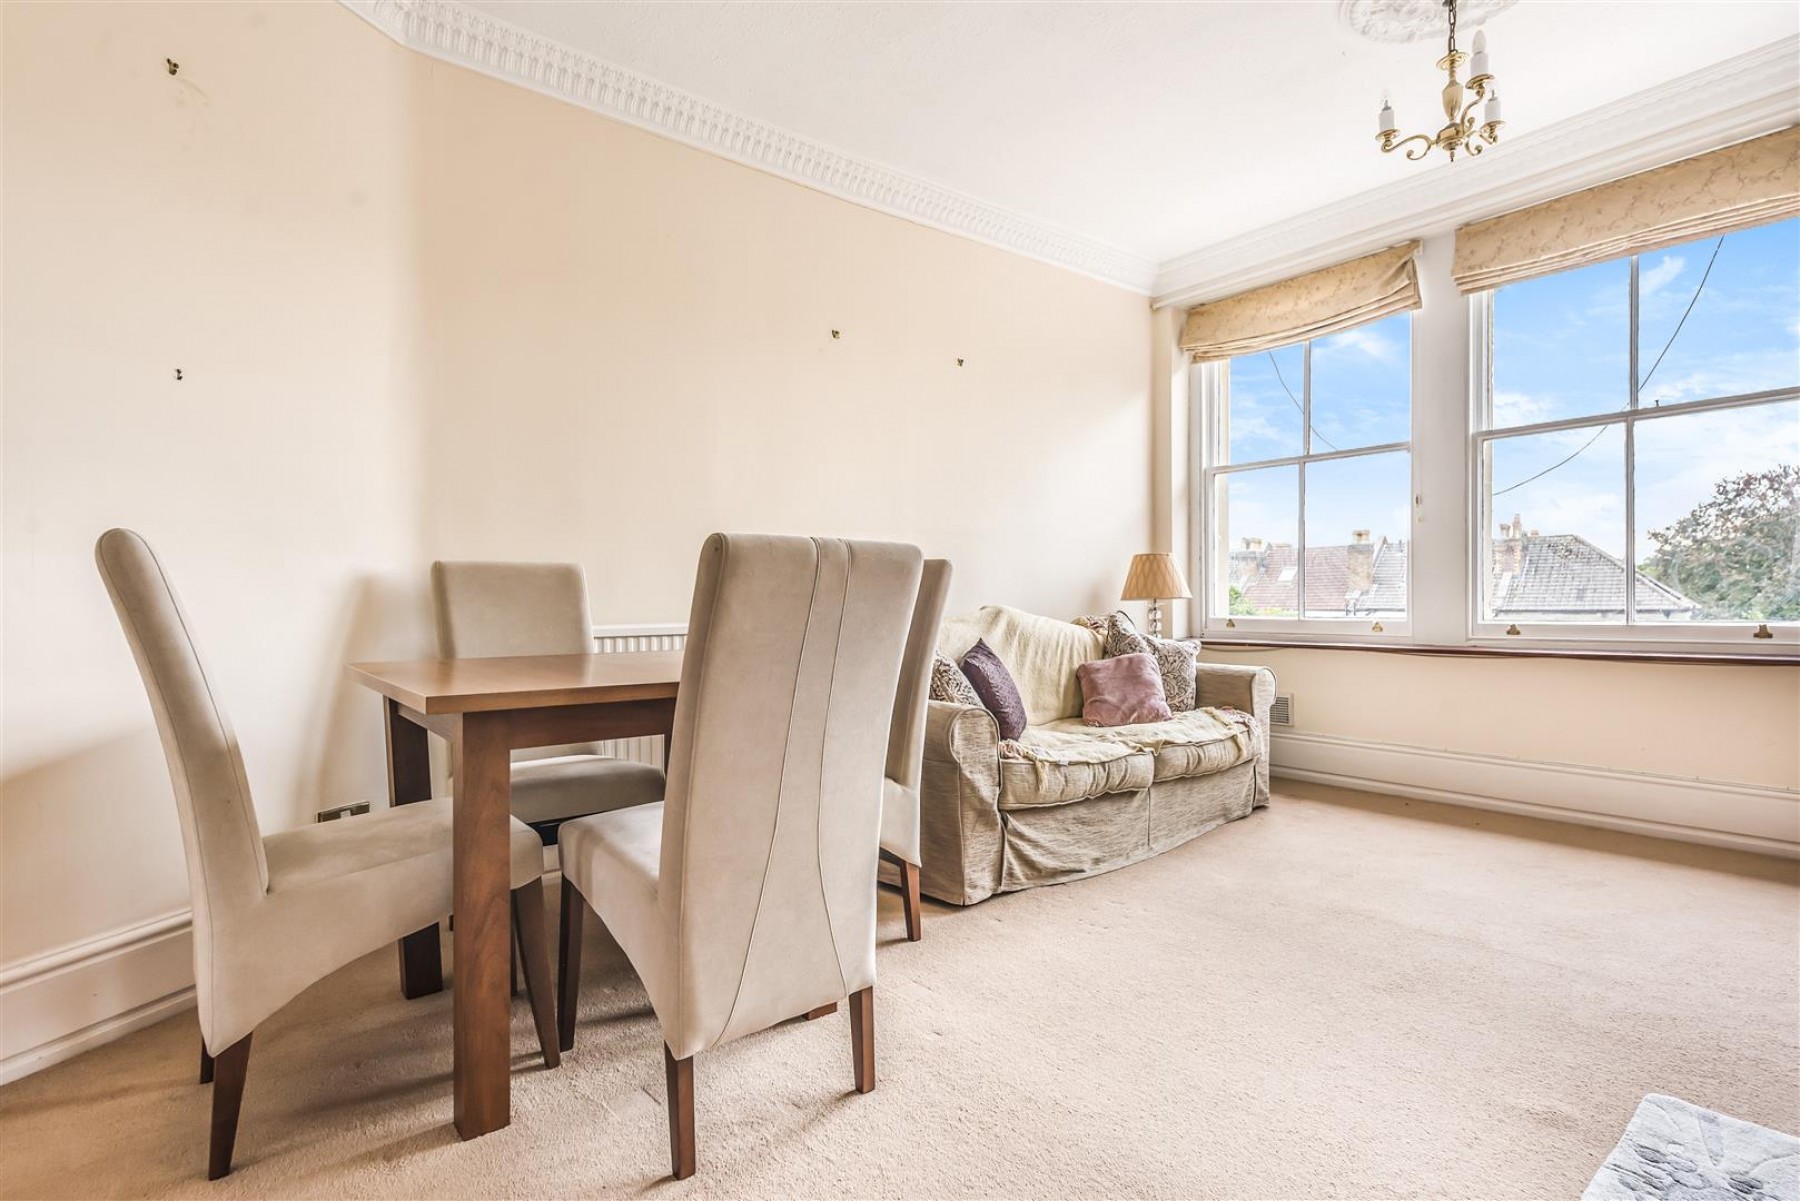 Images for CLIFTON FLAT FOR UPDATING & REDUCED PRICE